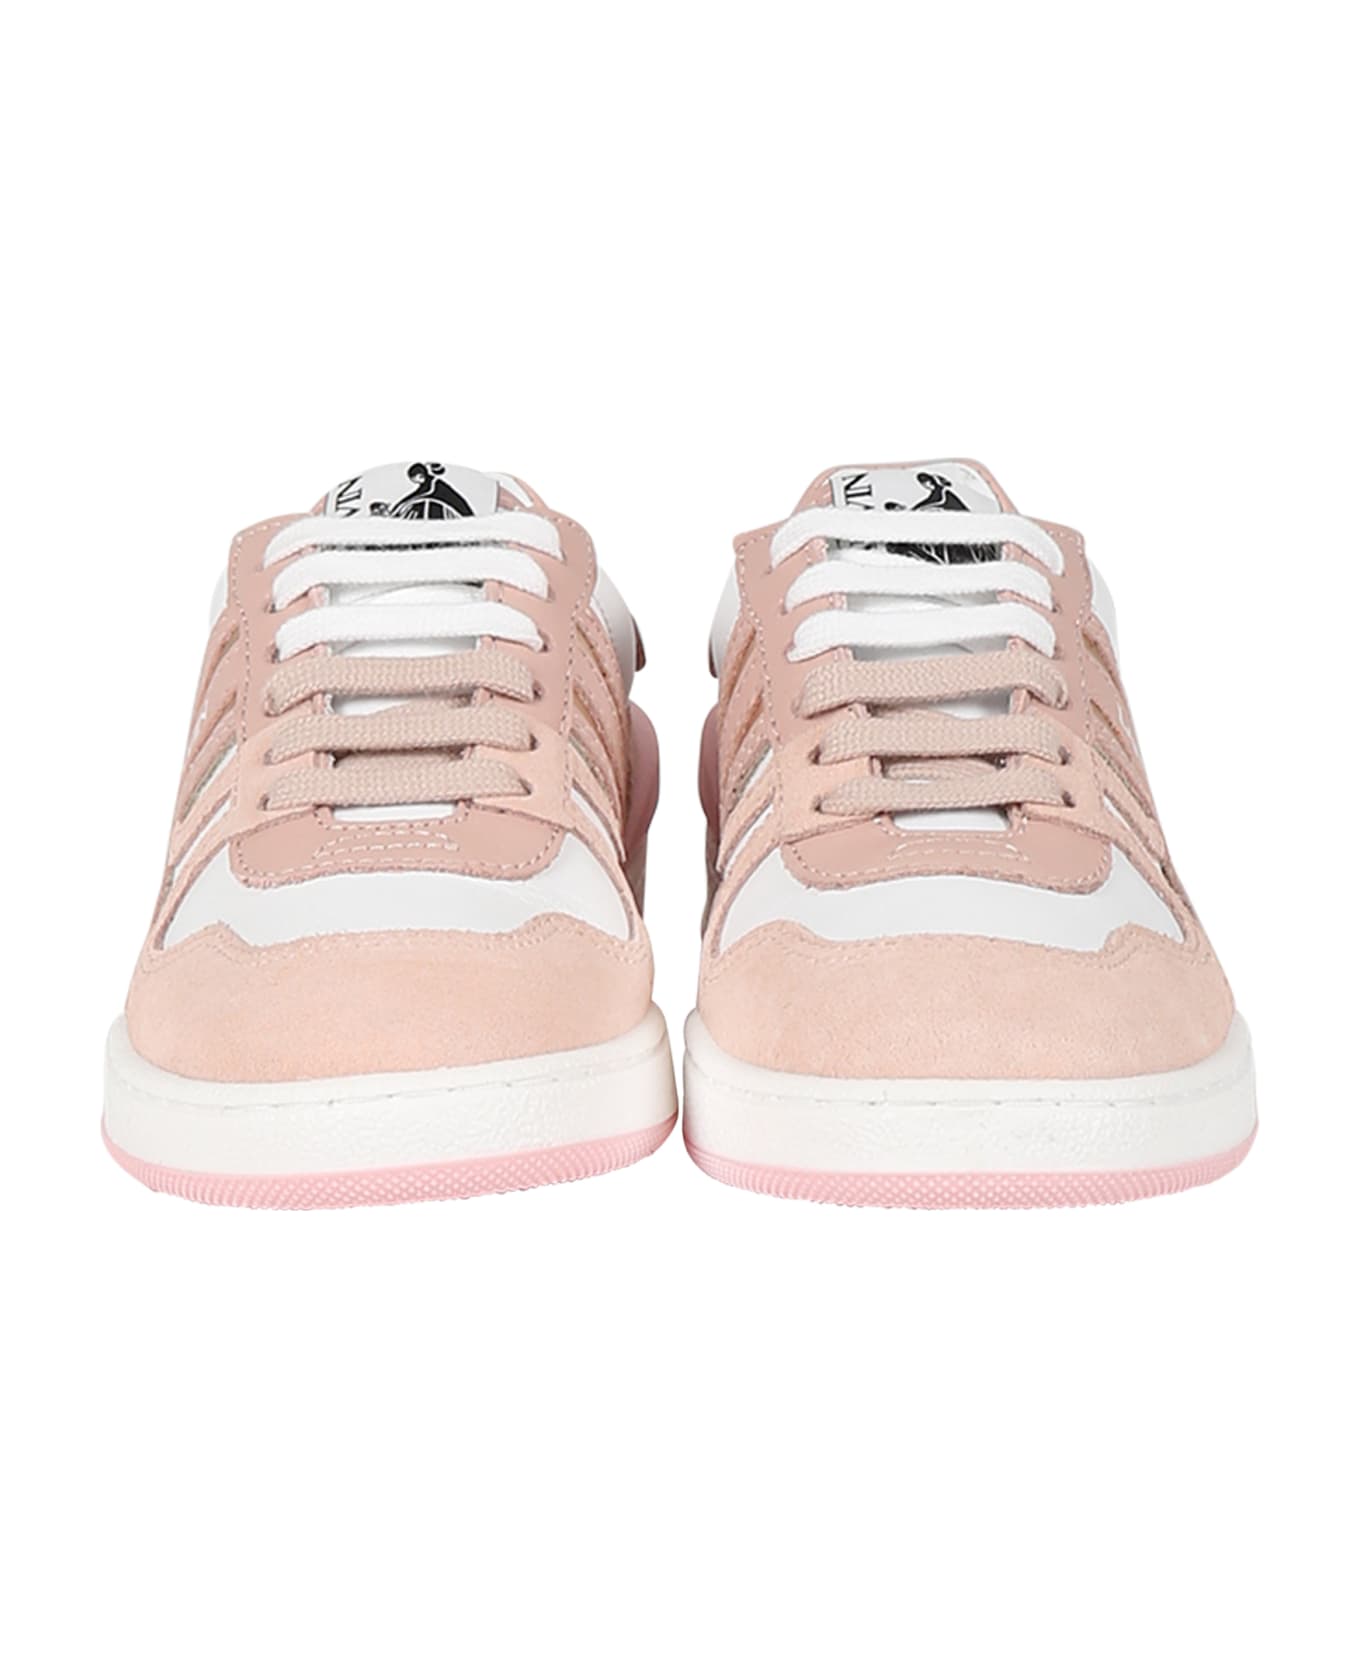 Lanvin Pink Sneakers For Girl With Logo - Pink シューズ